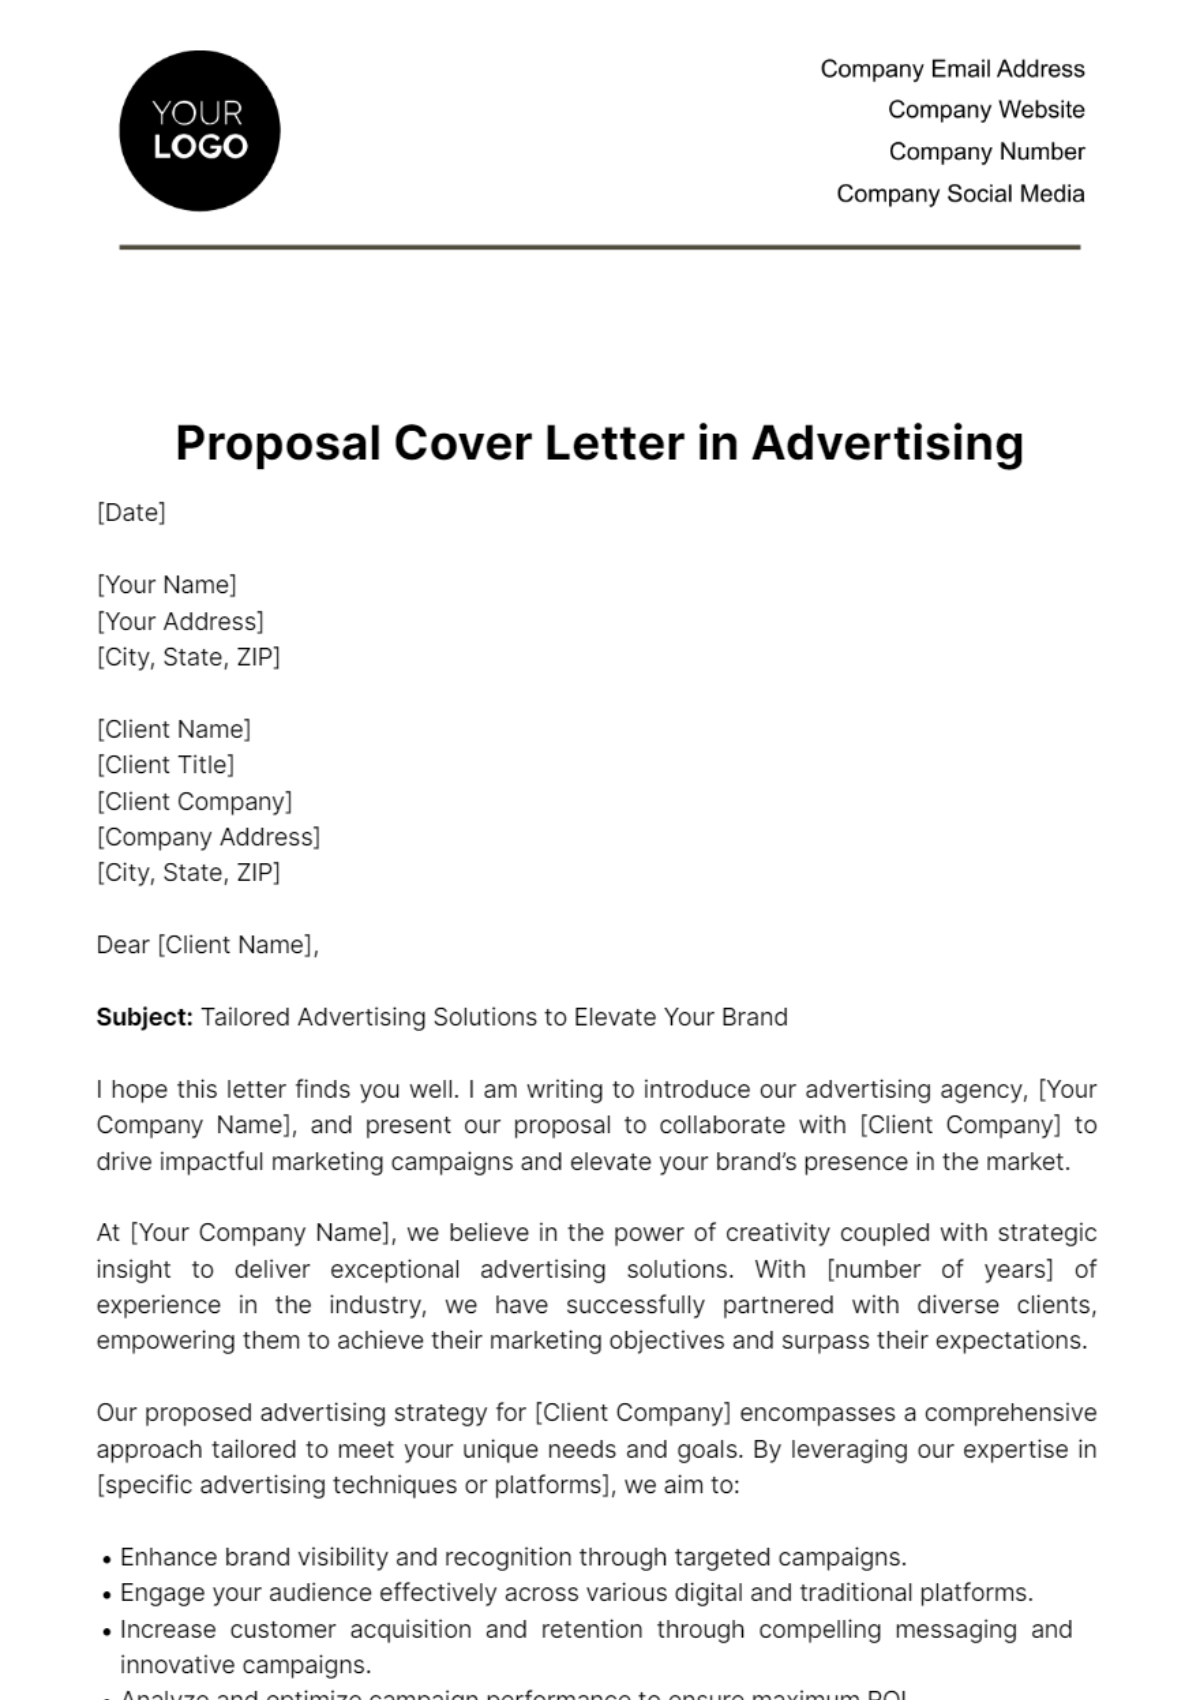 Proposal Cover Letter in Advertising Template